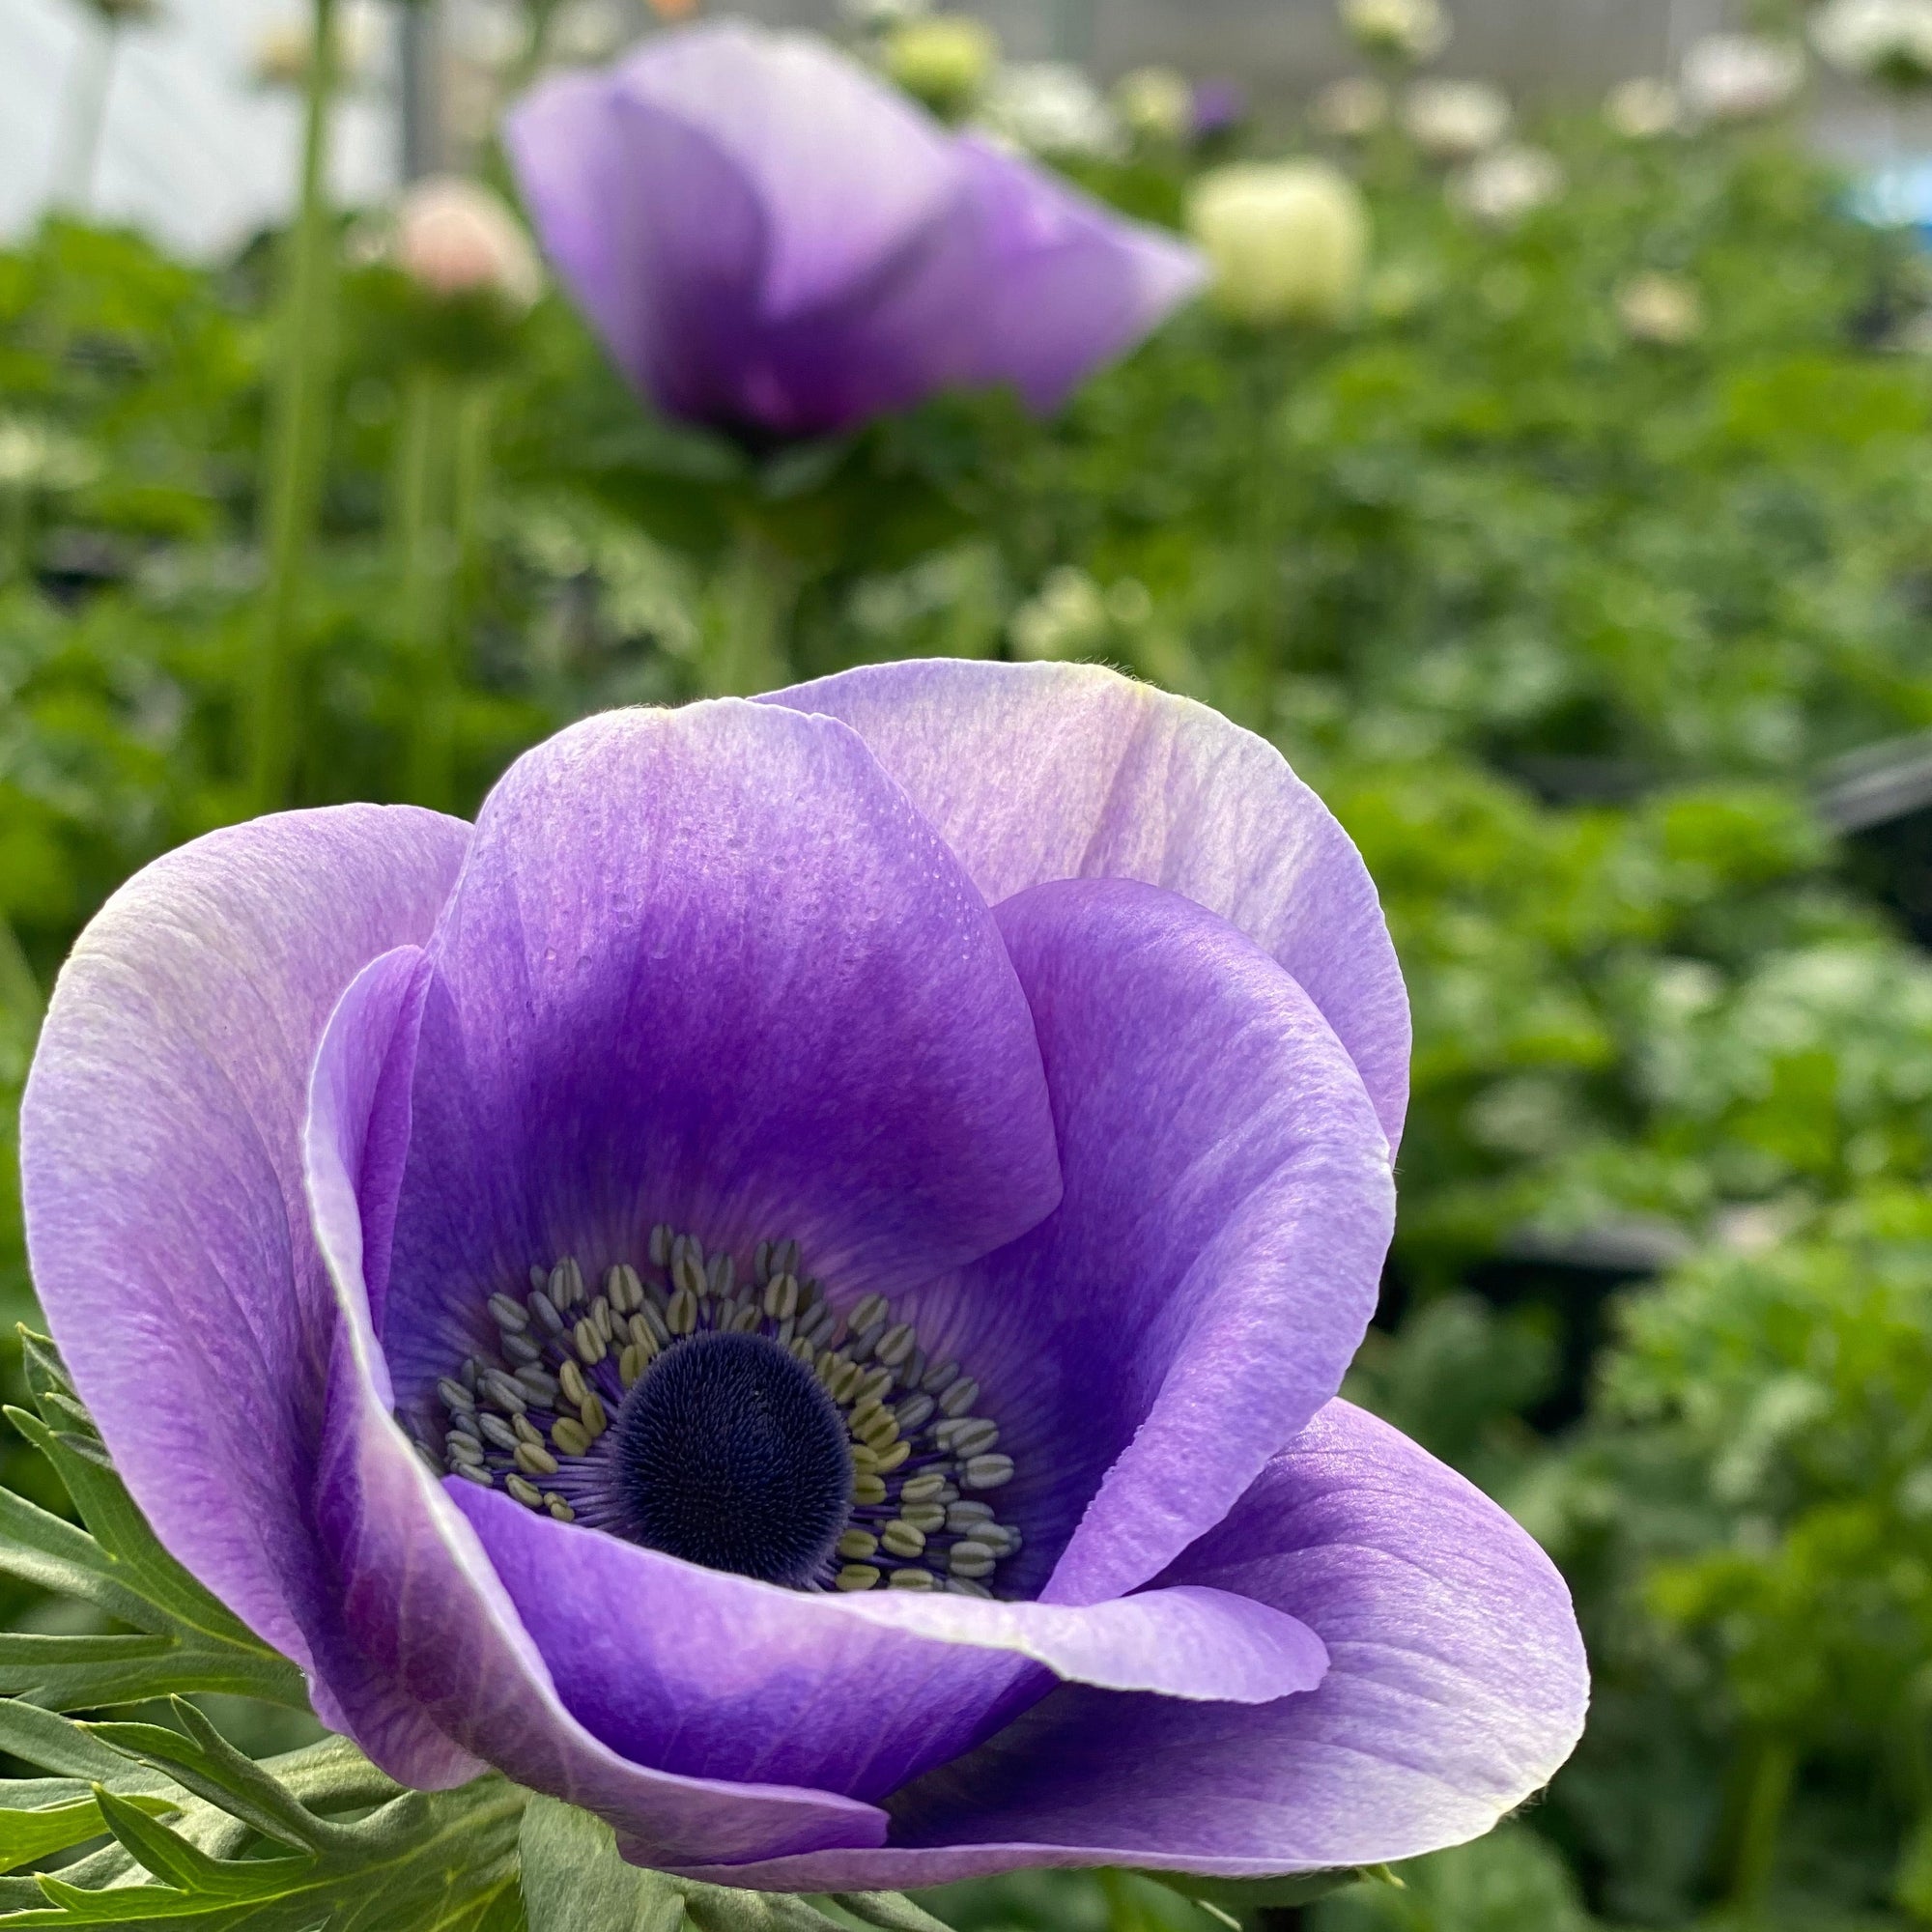 Vibrant anemone blooms in a lush cut flower garden, showcasing the premium quality corms available for purchase.